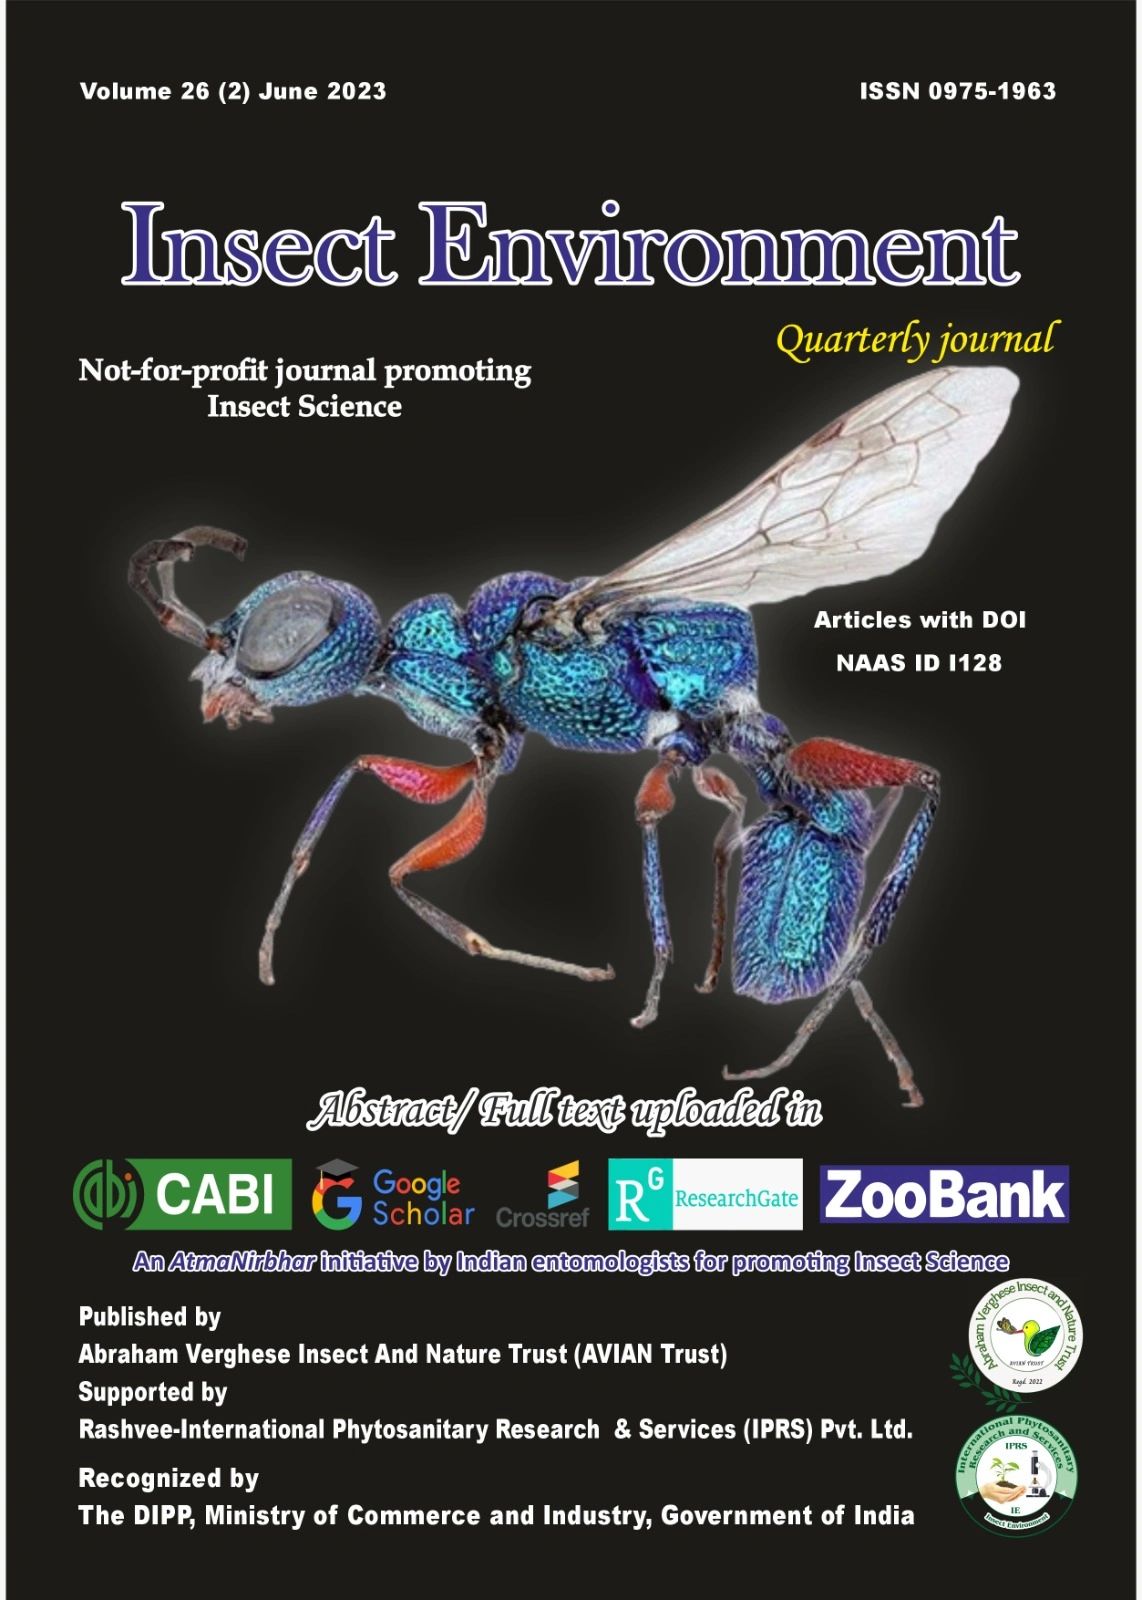 Insect Environment: A Trend-setter in Insect Journalism